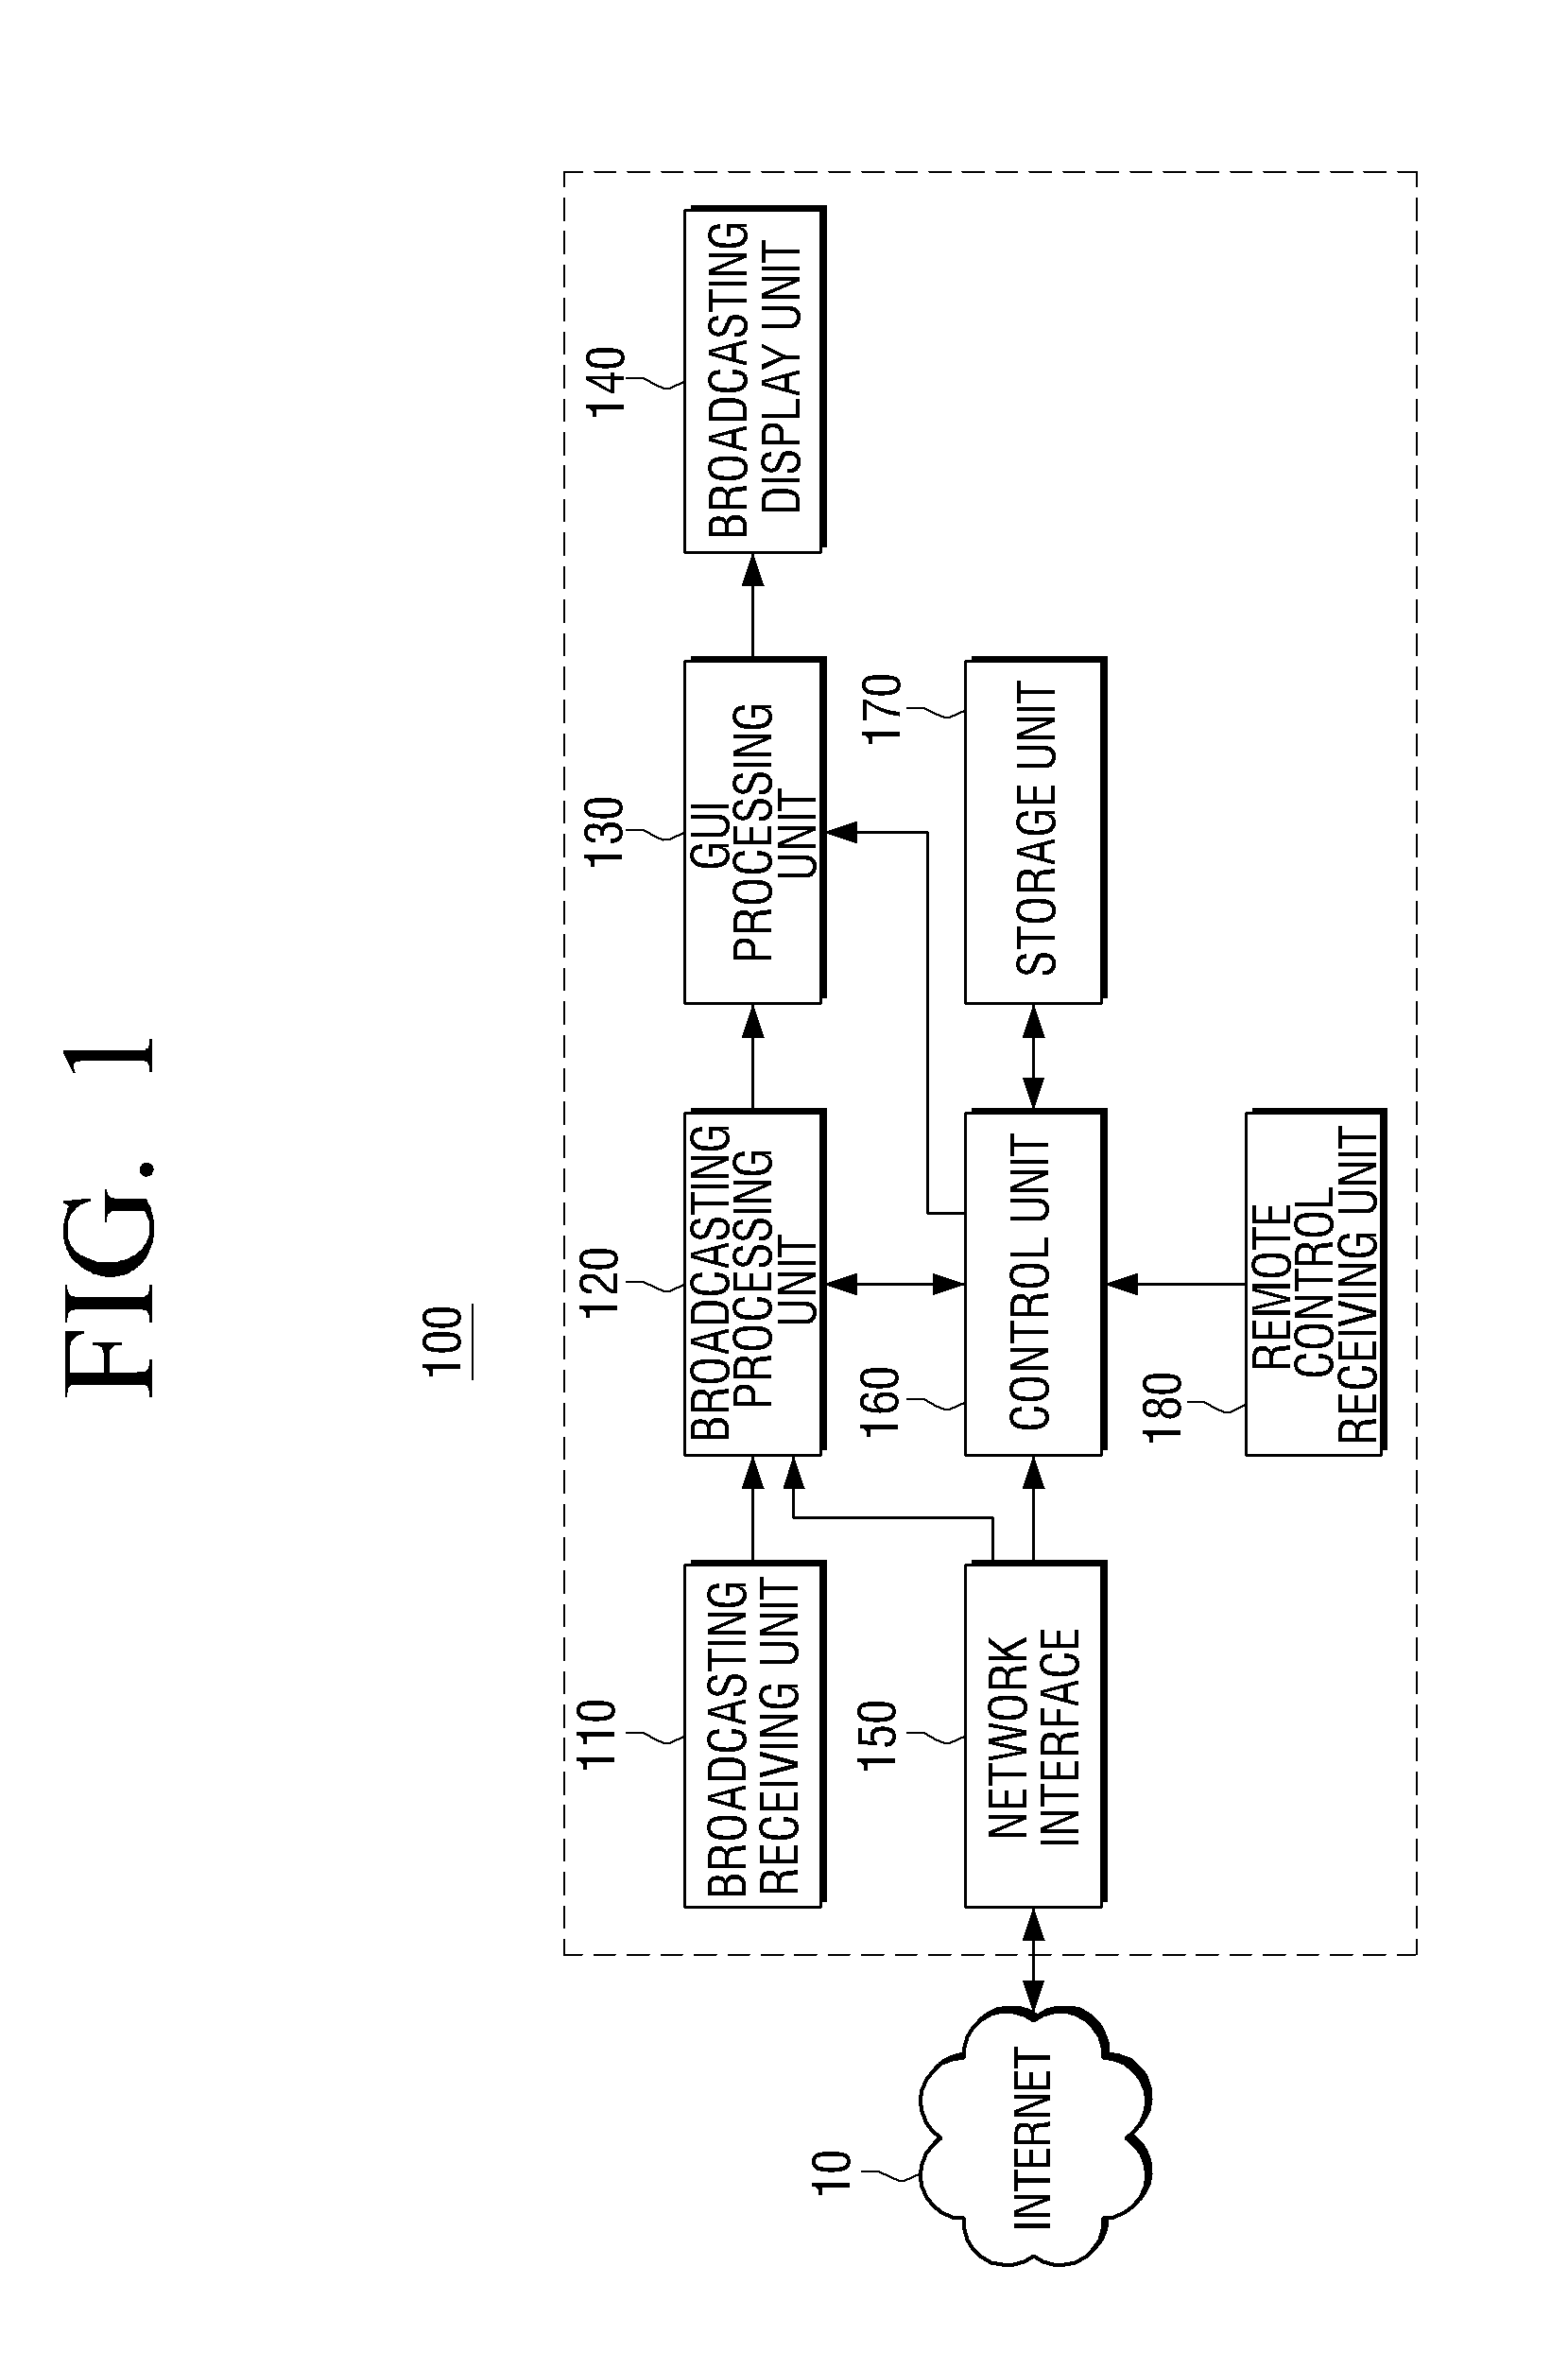 Method for transmitting contents information, recommending contents, and providing reliability for recommended contents, and multimedia device using the same